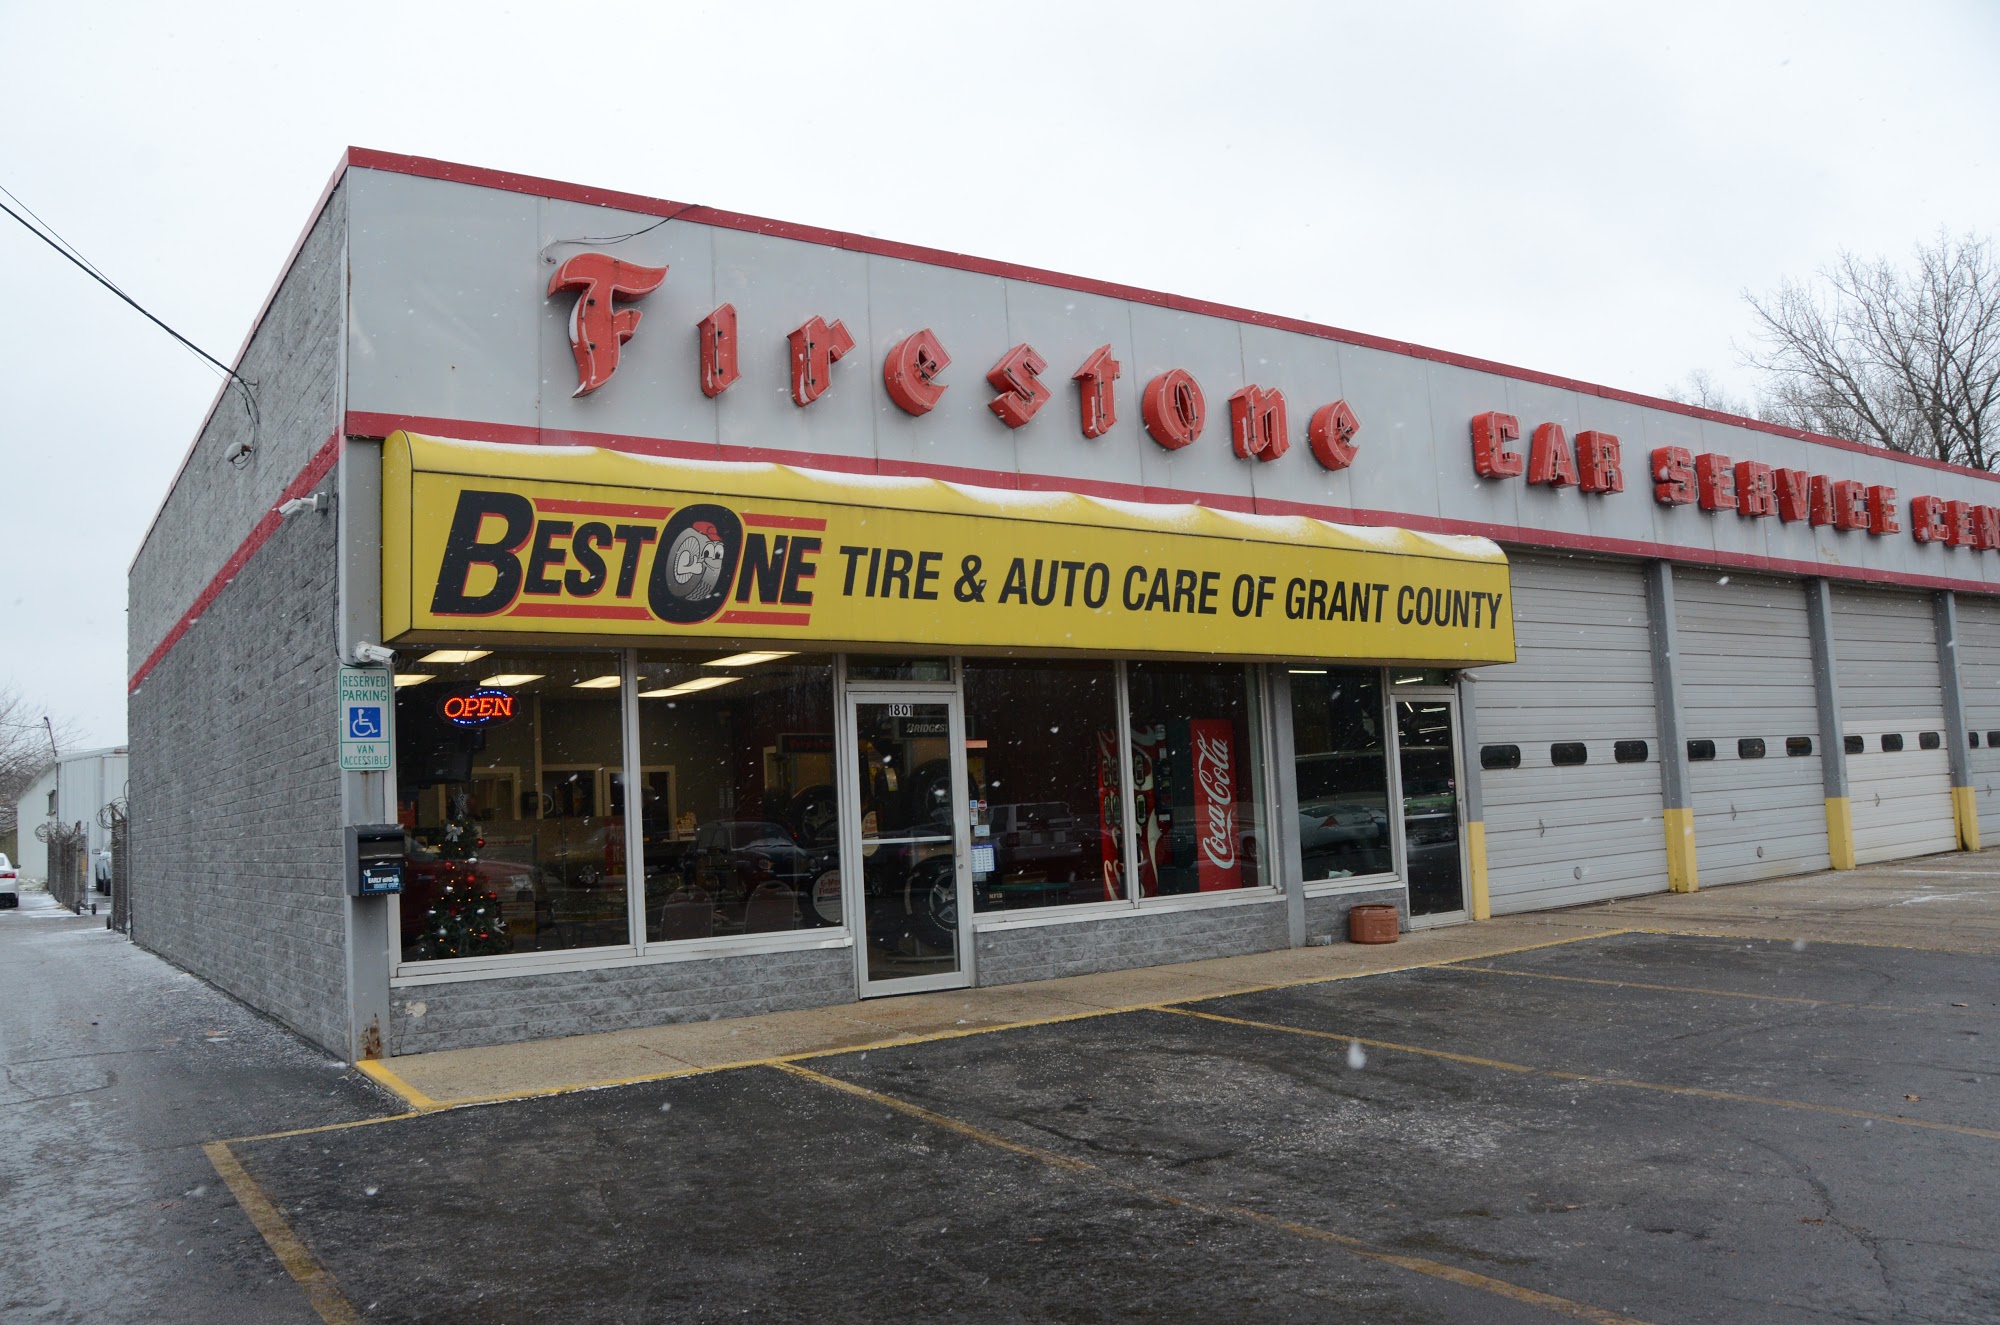 Best One Tire & Auto Care of Grant County